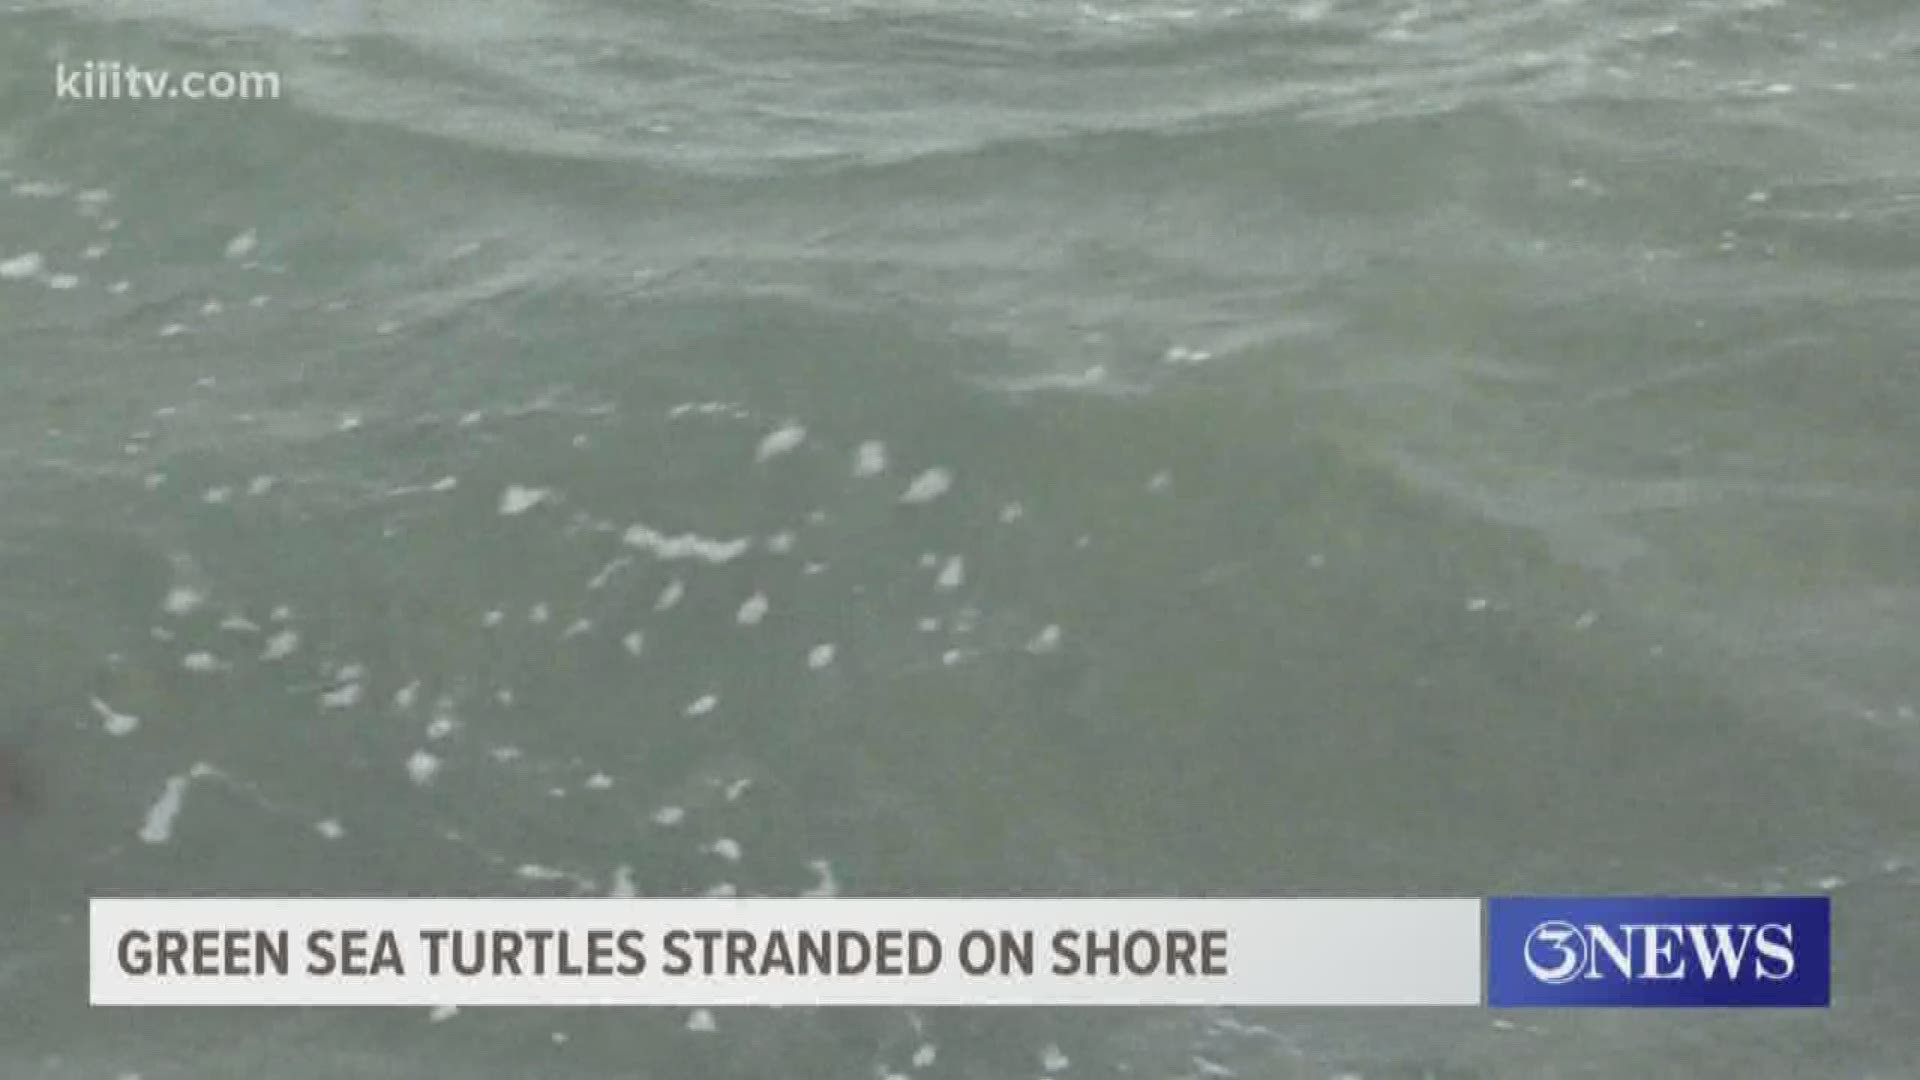 According to experts, the turtles are getting stranded in much higher numbers than usual because of our strong winds and tidal conditions.